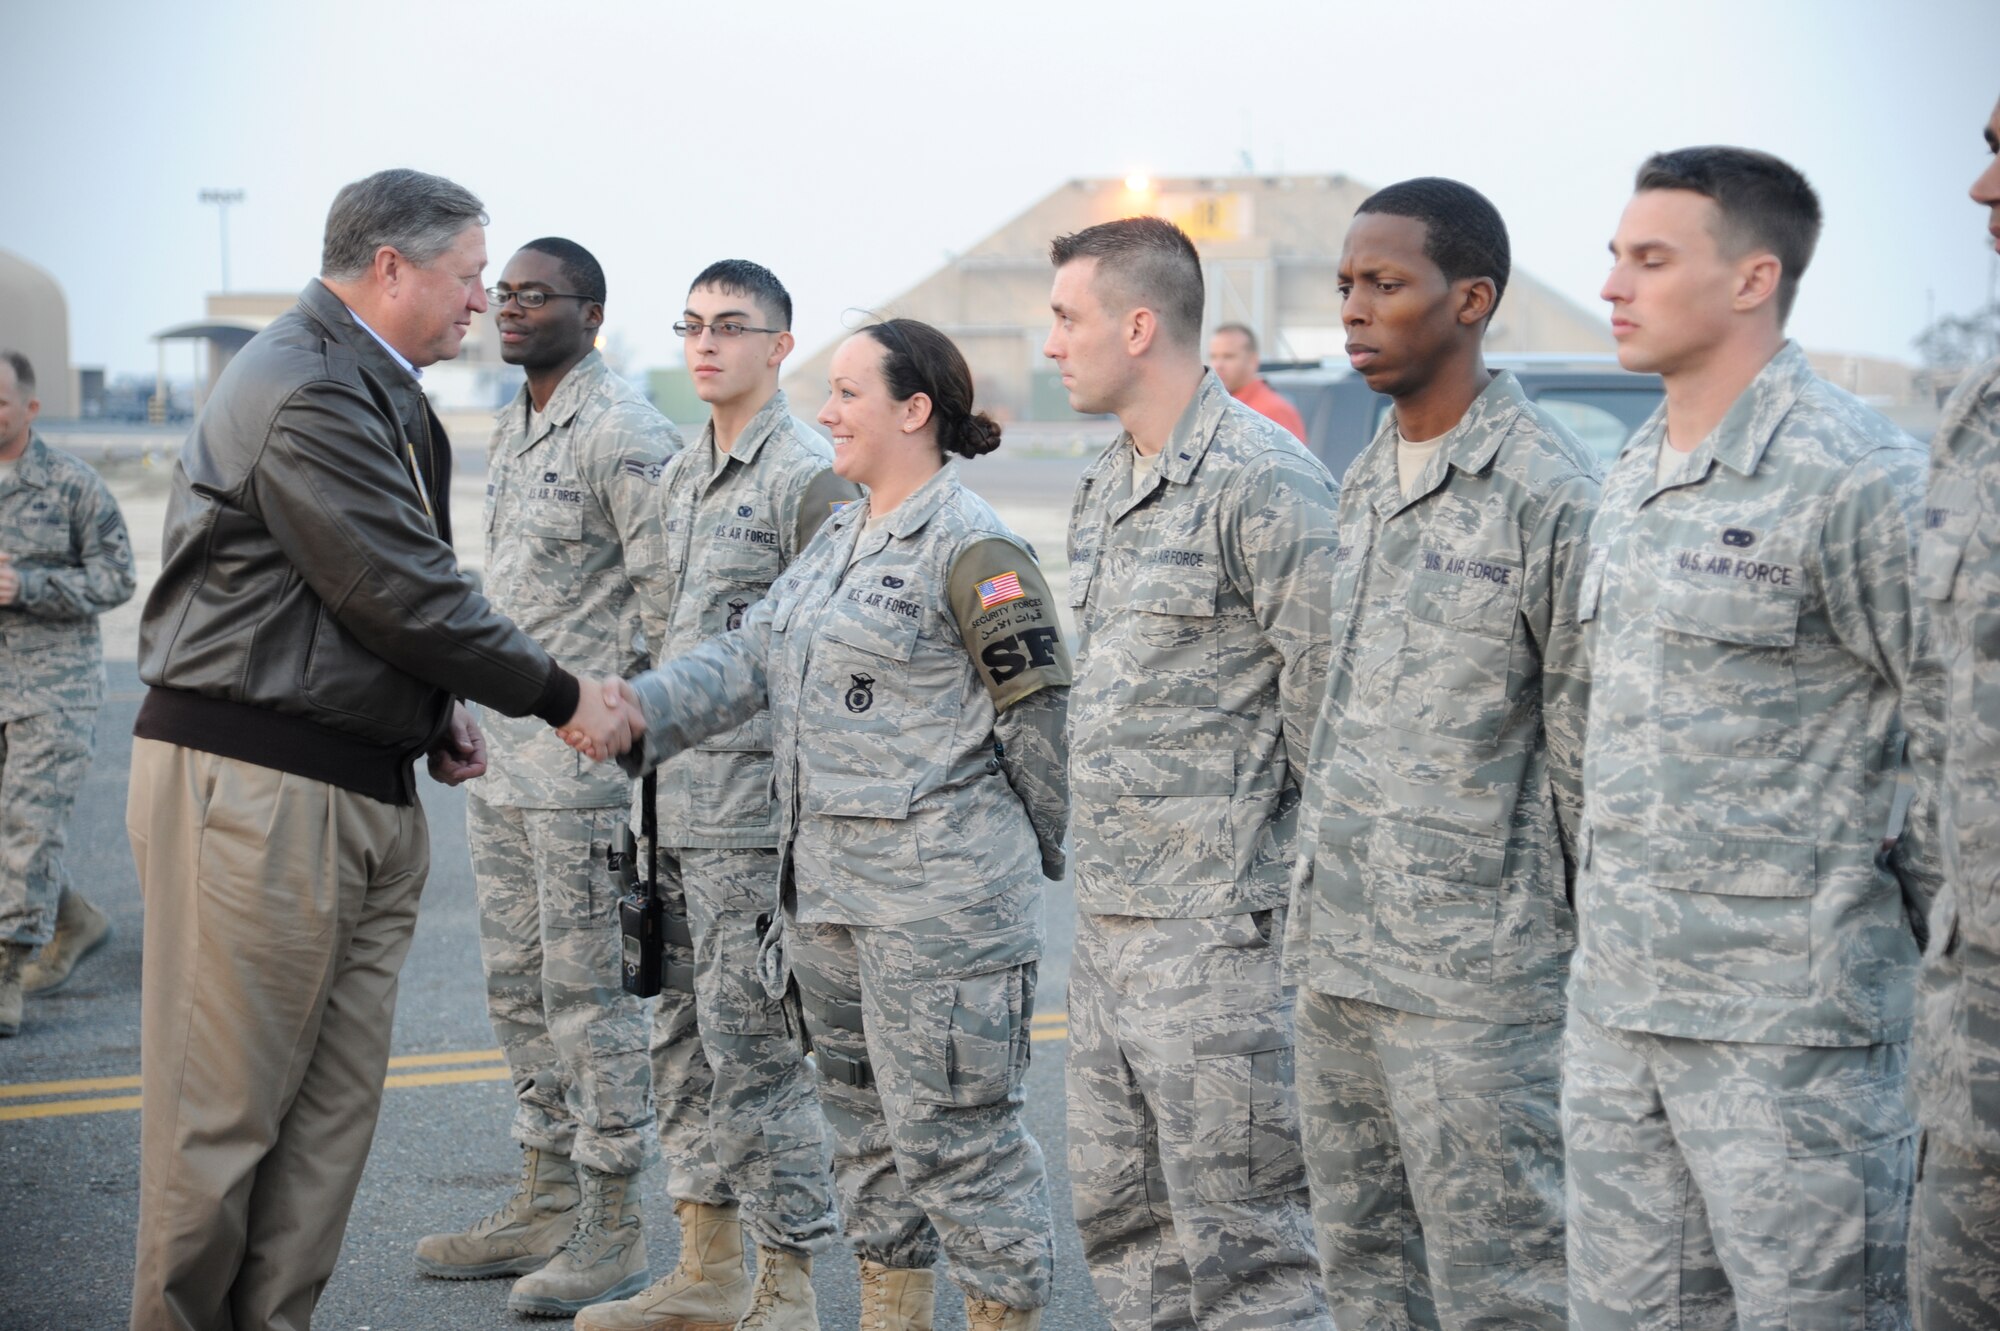 Secretary of the Air Force Michael Donley greets Airmen at the 386th Air Expeditionary Wing during a visit to a base in Southwest Asia on Dec. 30, 2012. Donley and Chief Master Sgt. of the Air Force James Roy visited the wing as part of a multi-base tour of the region to thank Airmen for their service and to discuss Air Force issues. (U.S. Air Force photo by Staff Sgt. Austin Knox)